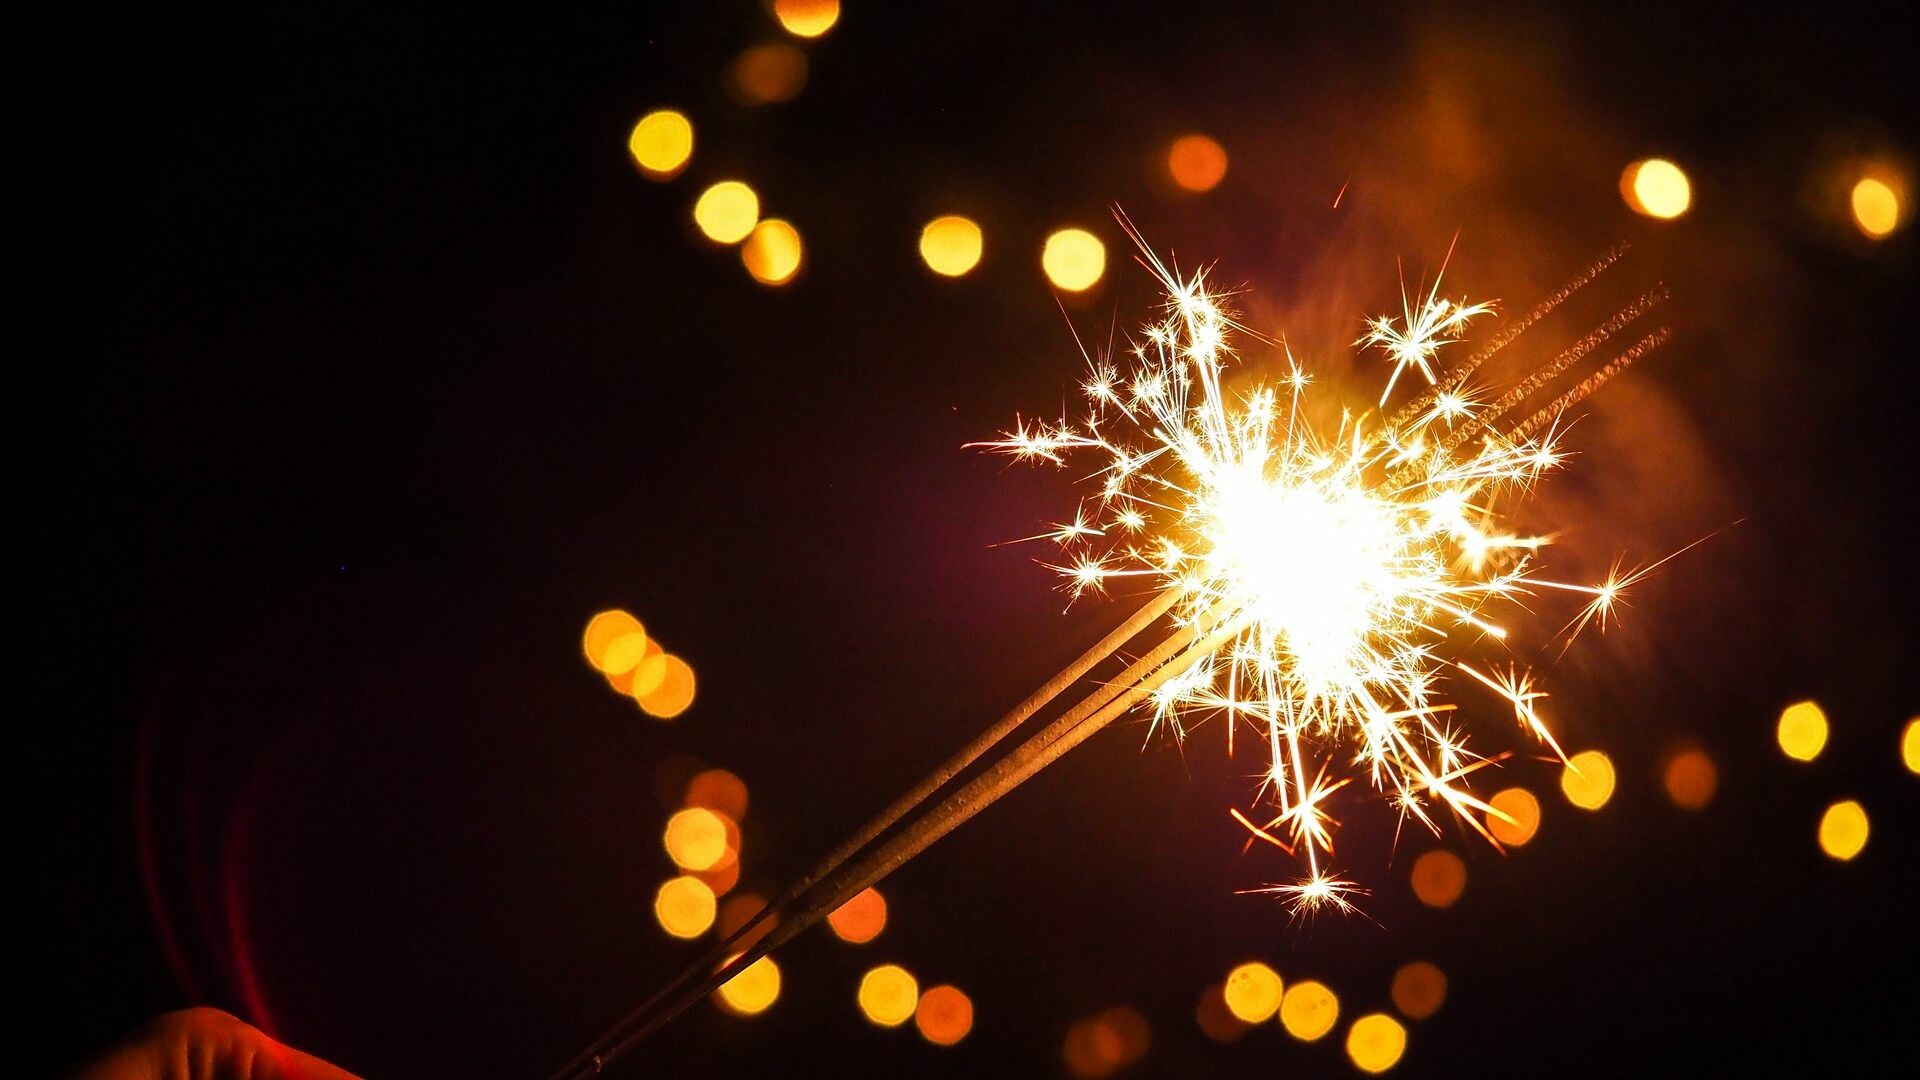 Bucket of sparklers, Festive celebration, Exciting vibes, Party atmosphere, 1920x1080 Full HD Desktop